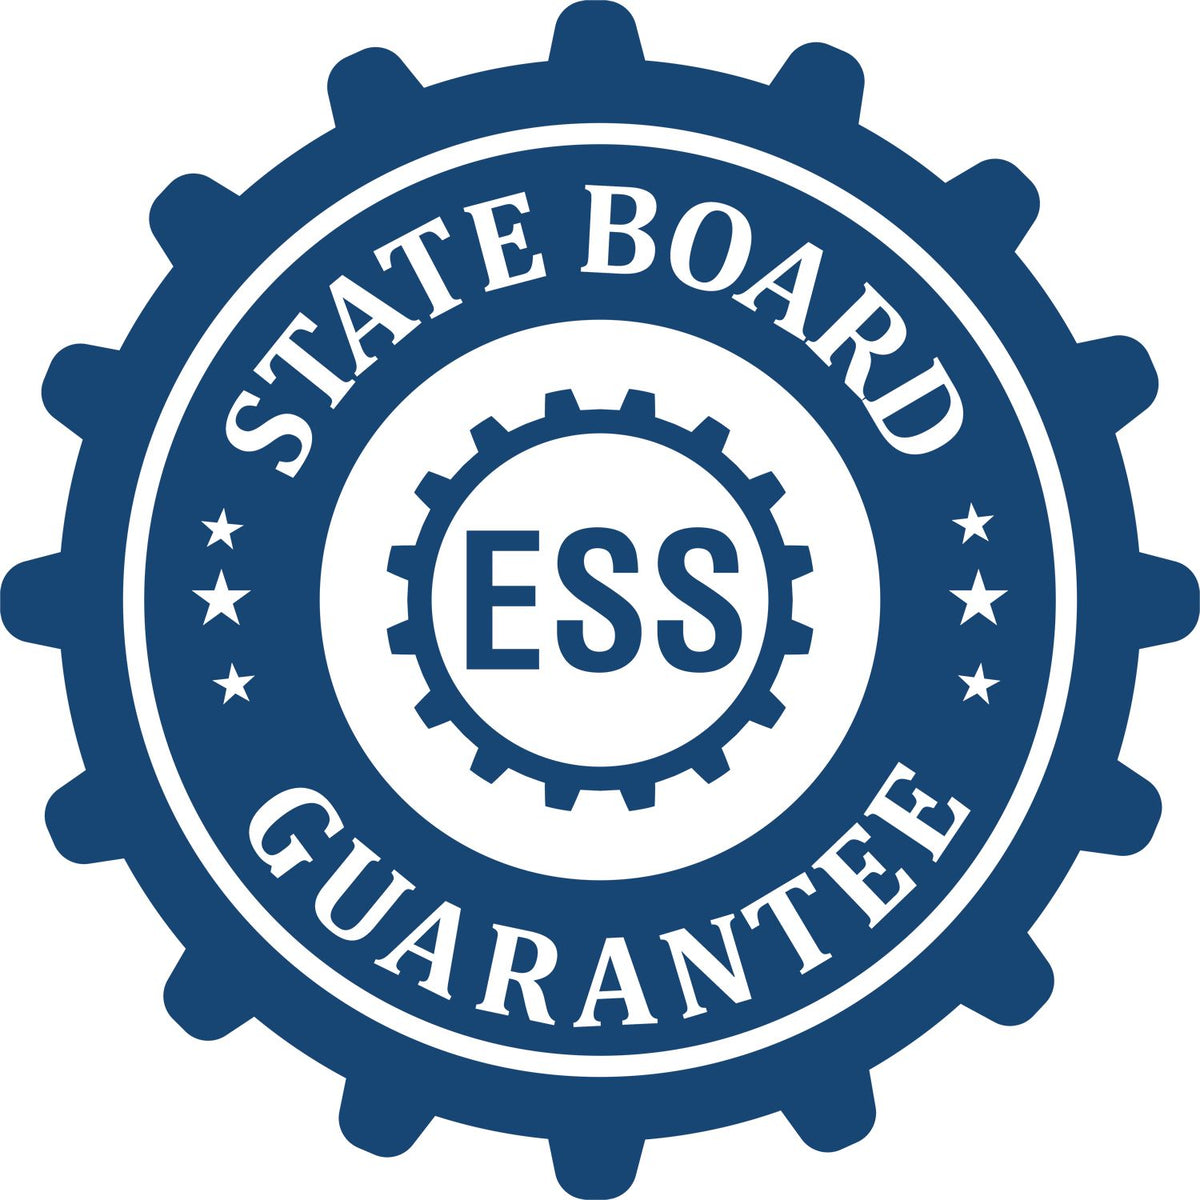 An emblem in a gear shape illustrating a state board guarantee for the Illinois Engineer Desk Seal product.